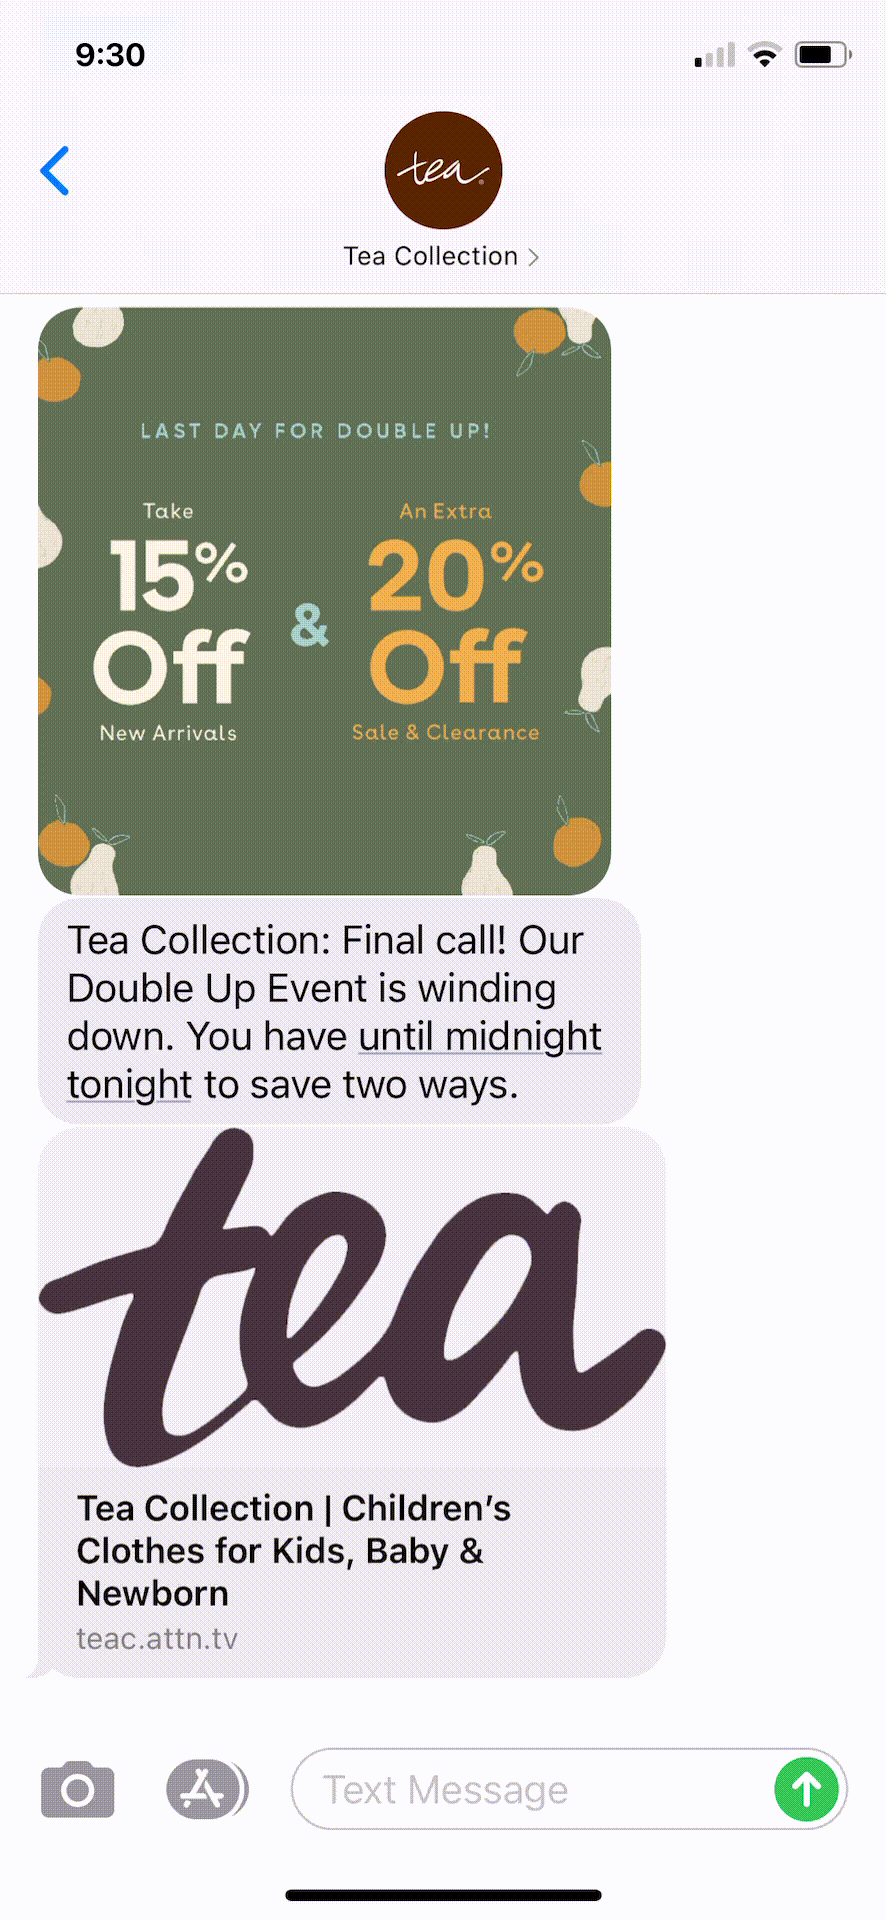 Tea-Collection-Text-Message-Marketing-Example-03.01.2021